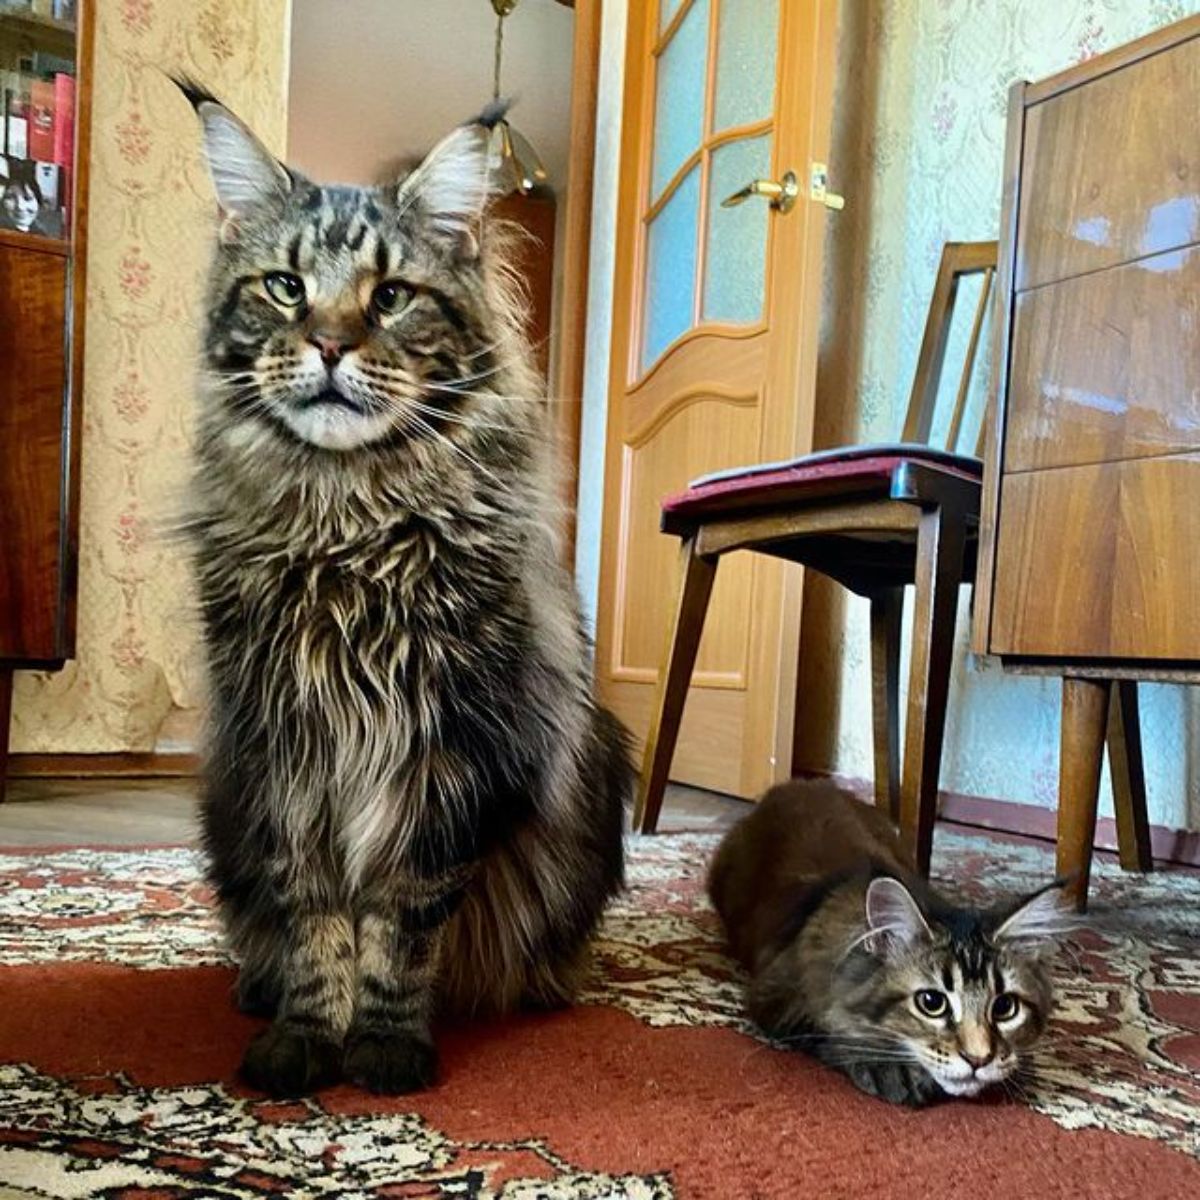 A tabby maine coon and a tabby maine coon kitten sitting on a carpet.